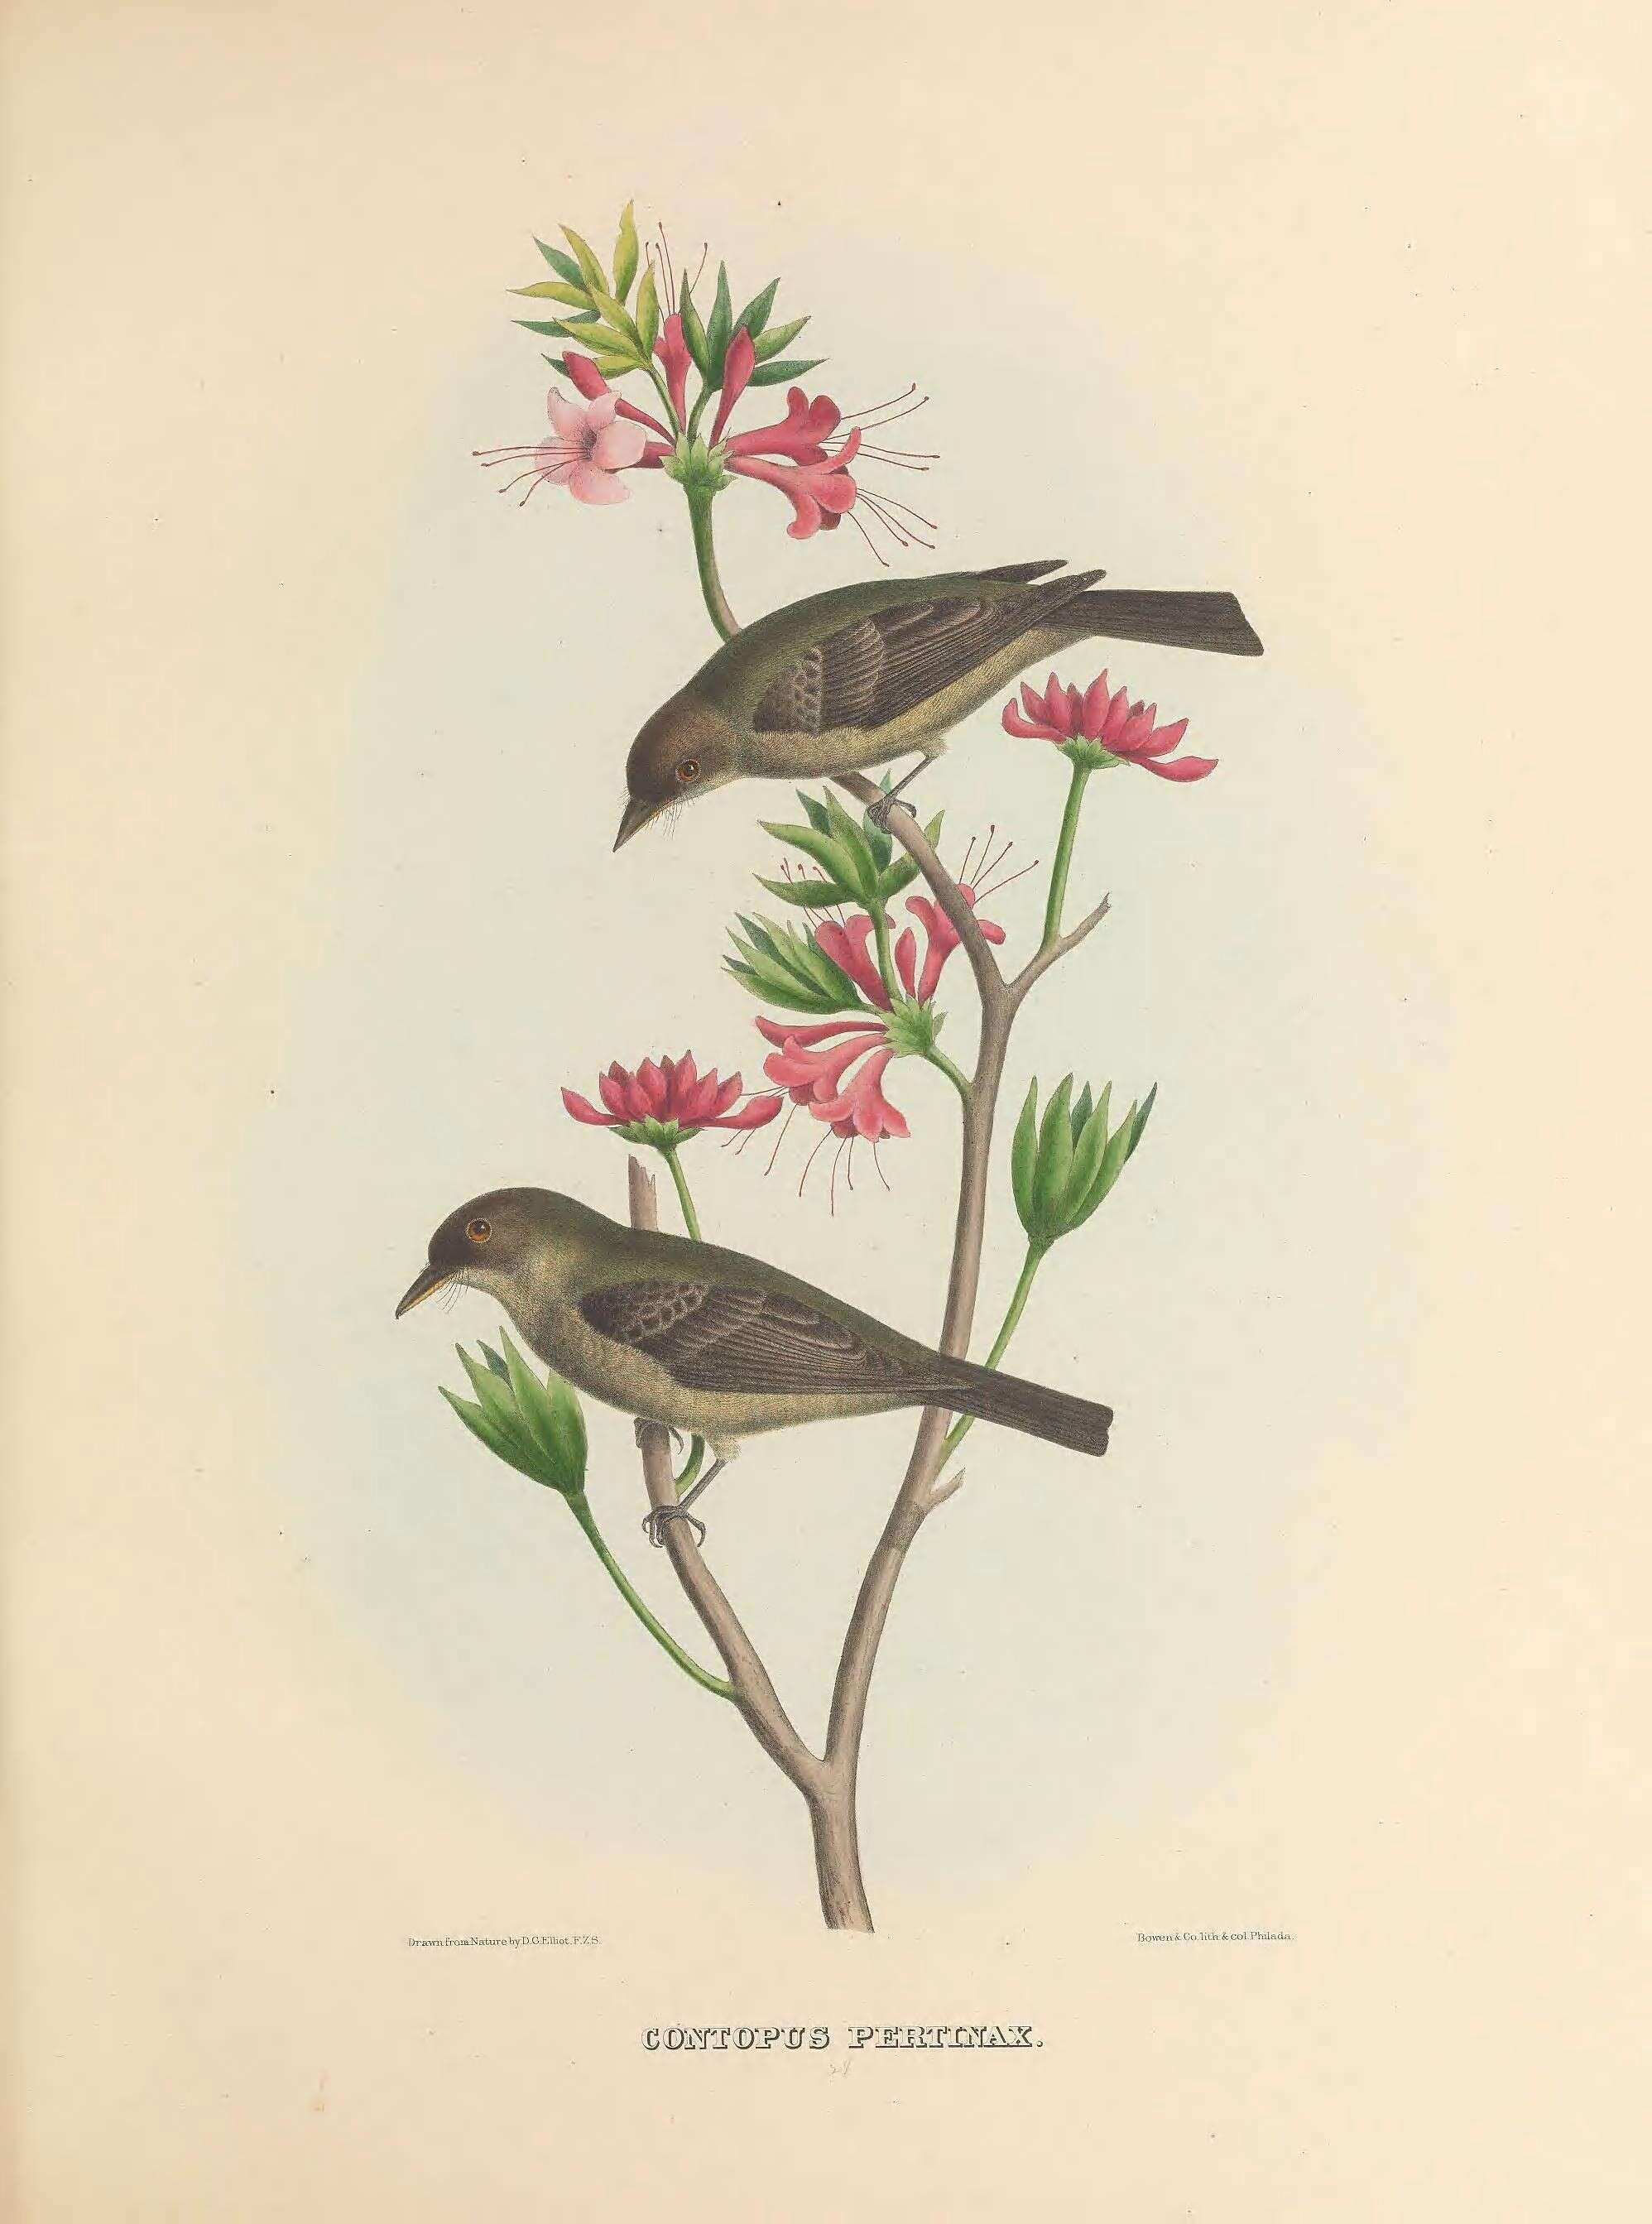 Image of Greater Pewee